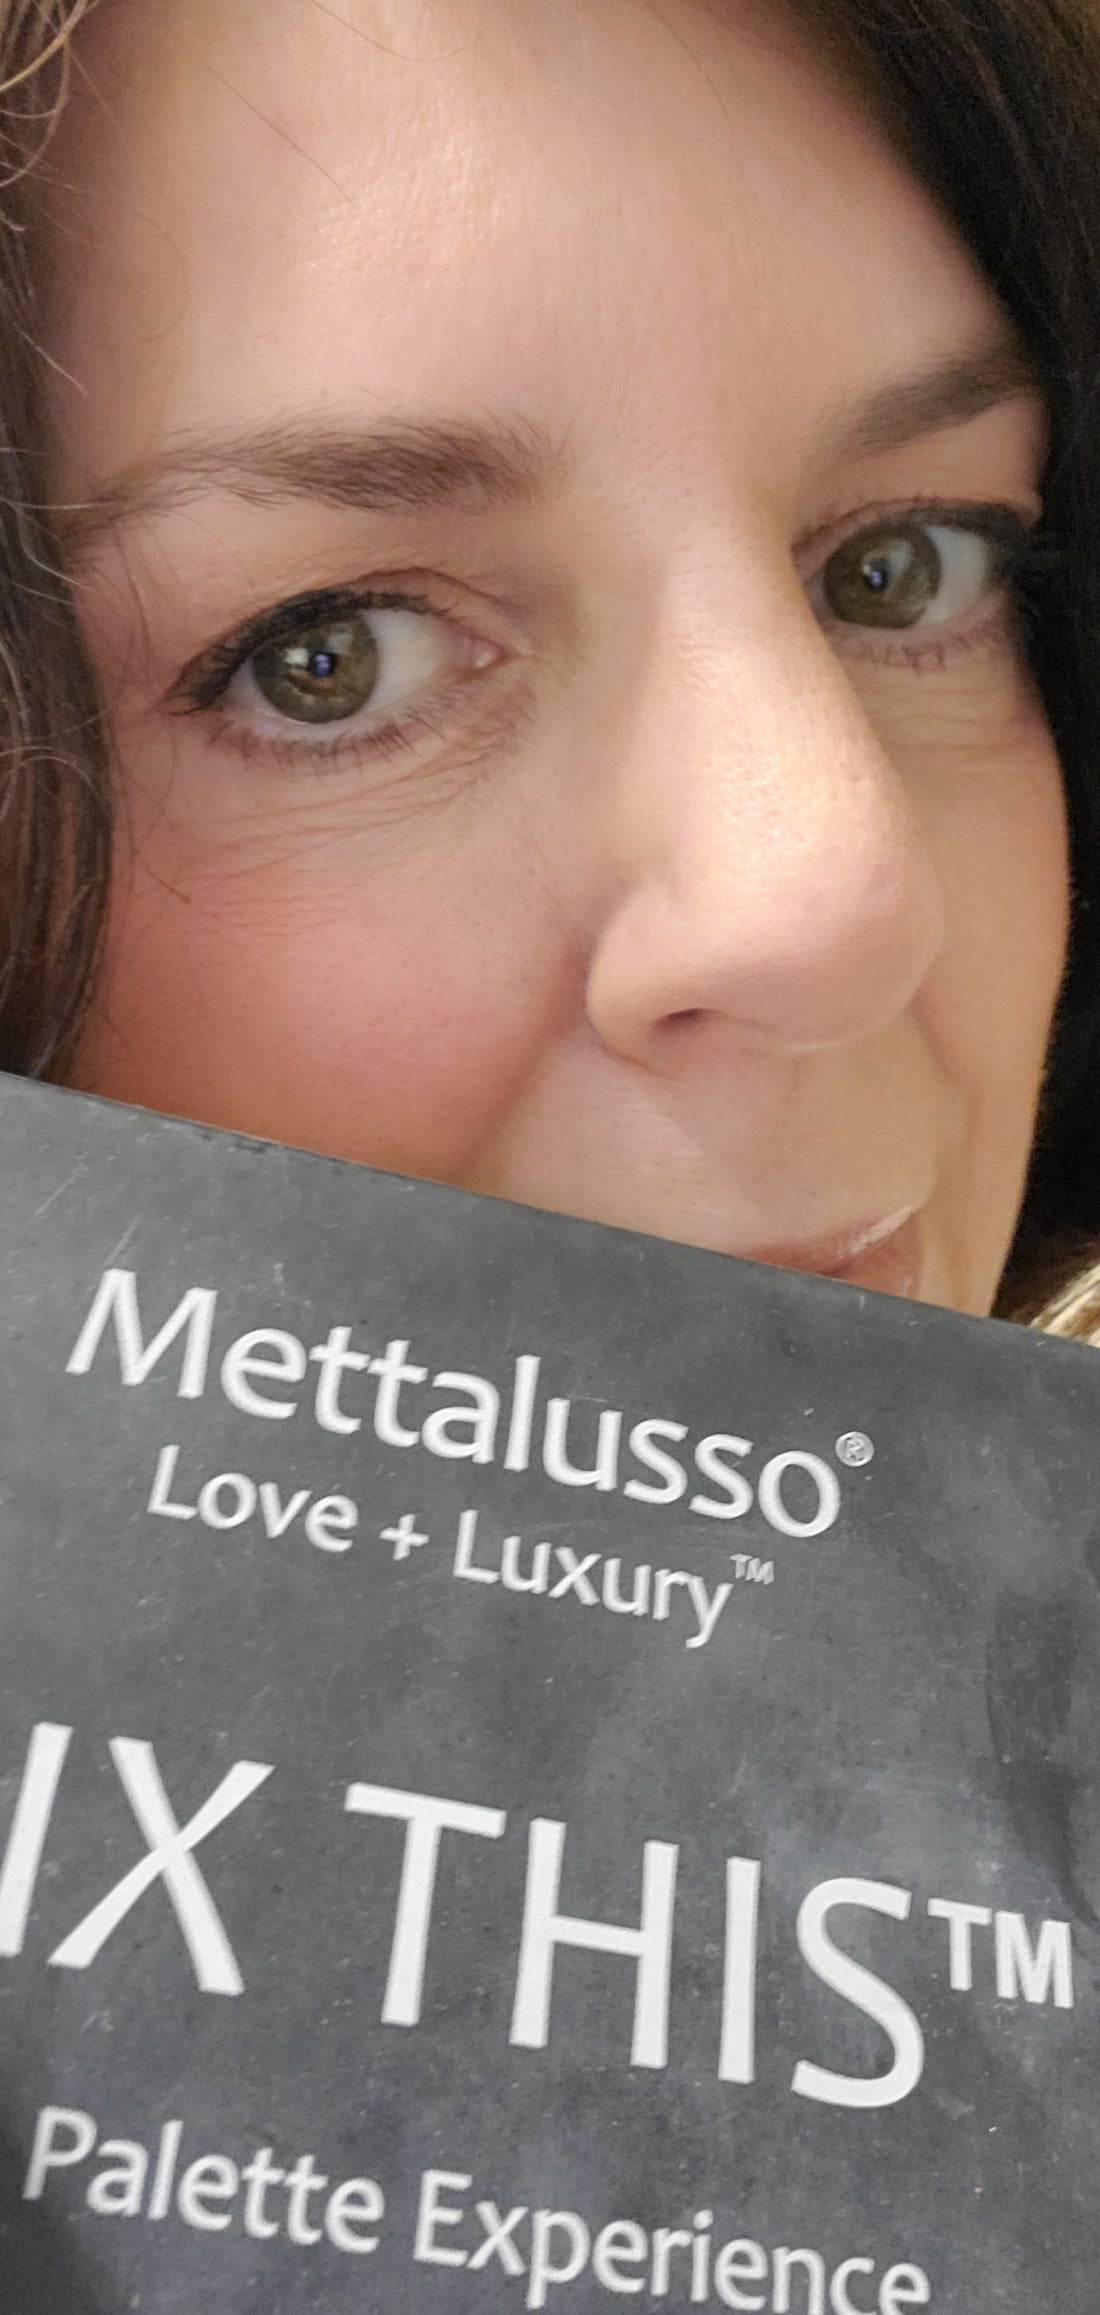 Mettalusso founder Christine C Oddo with vegan palette MIX THIS